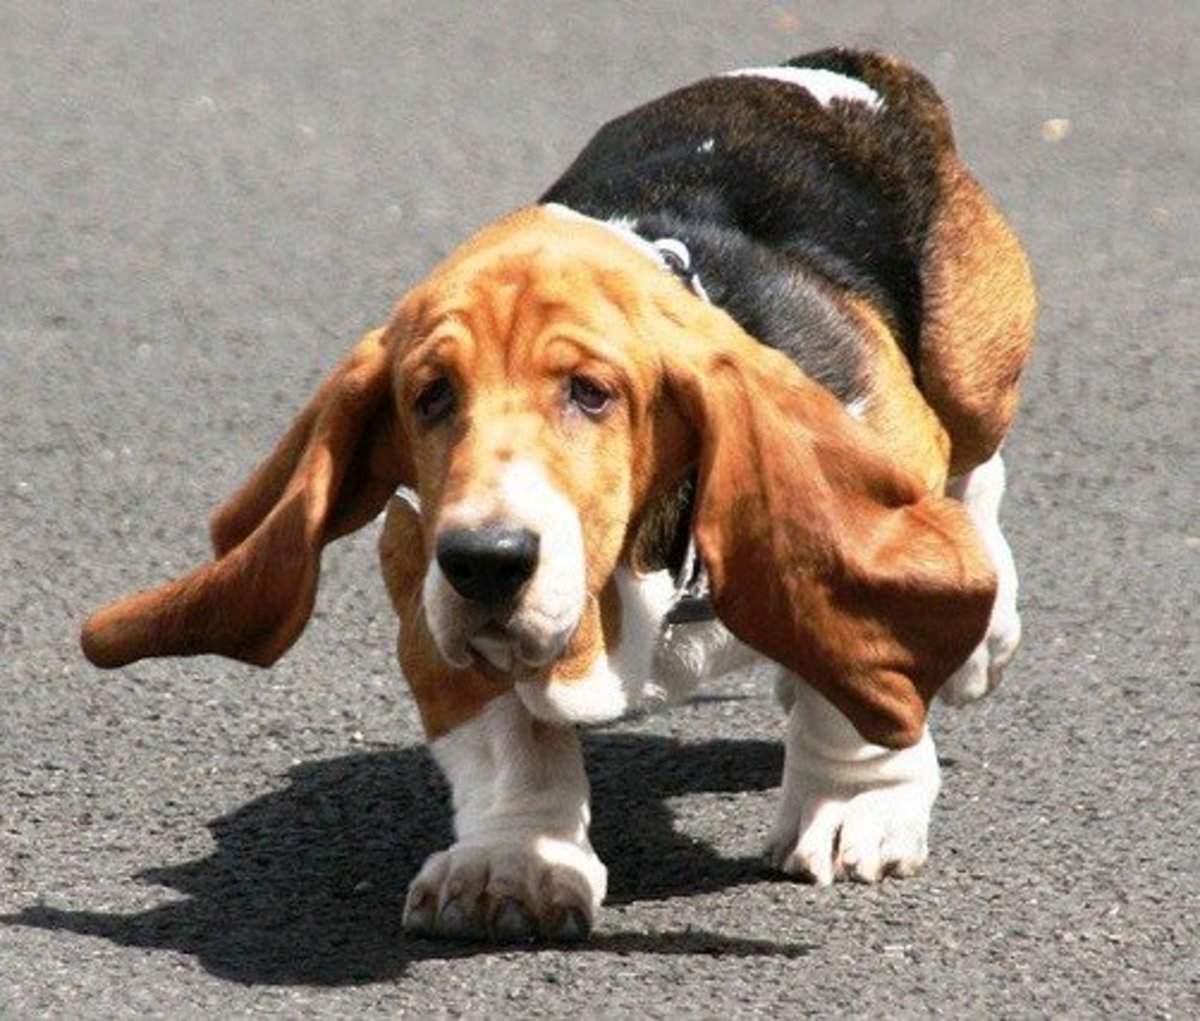 The Basset Hound makes a good dog for an apartment because they are friendly and sleep a lot.